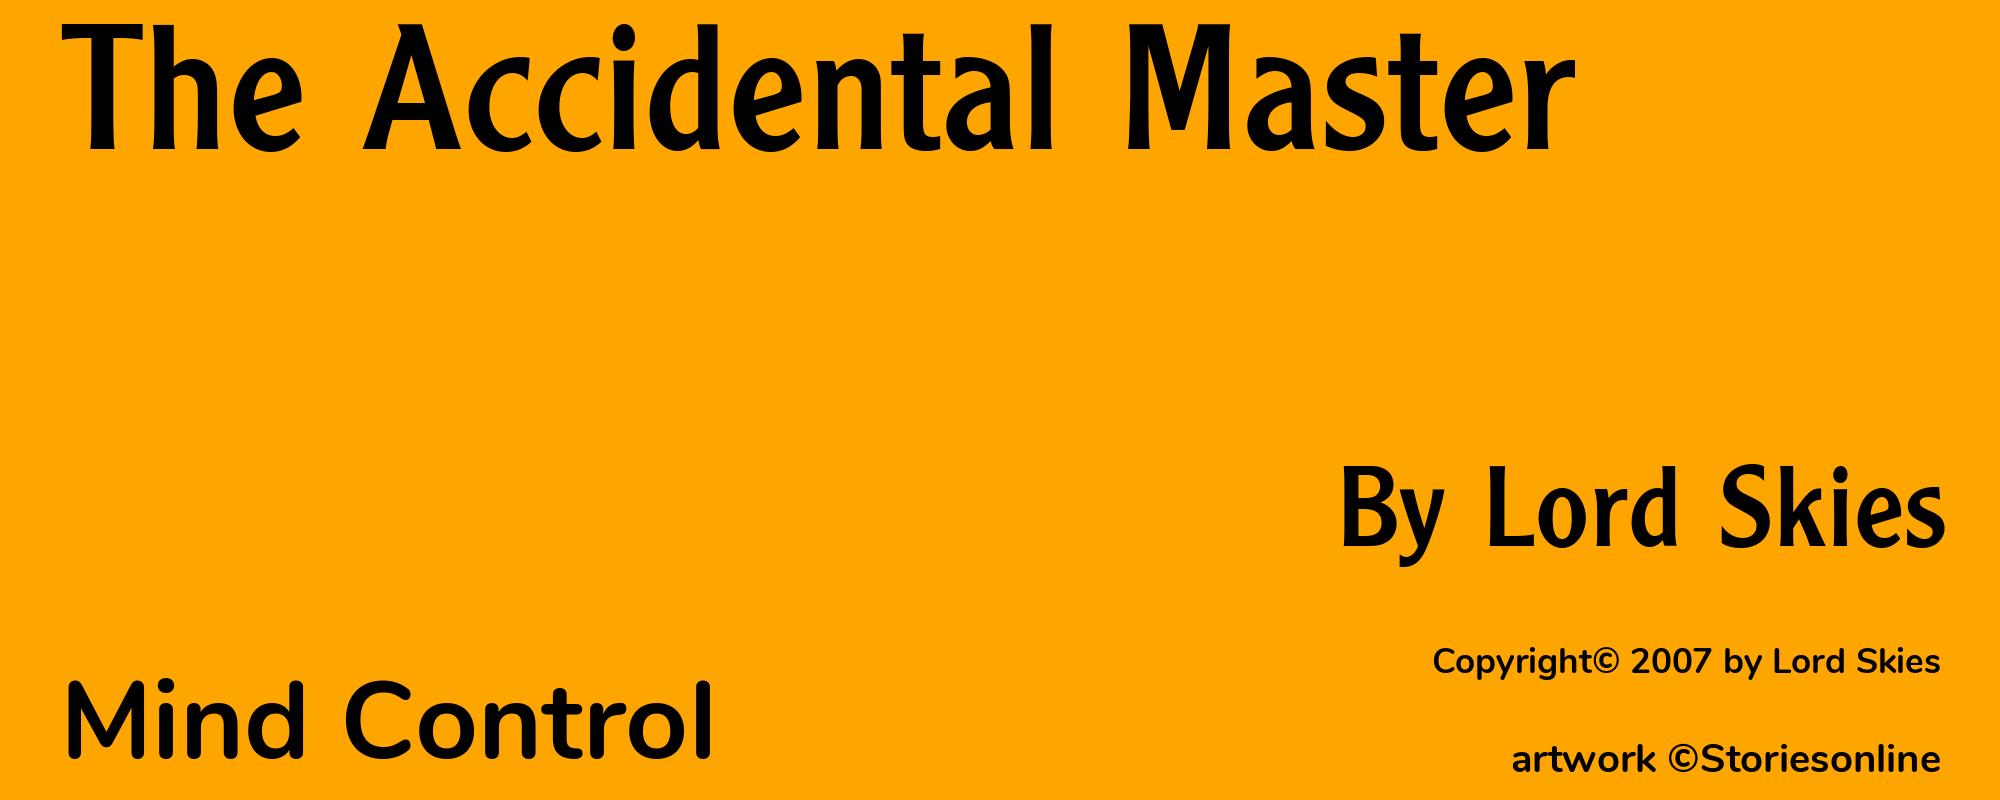 The Accidental Master - Cover